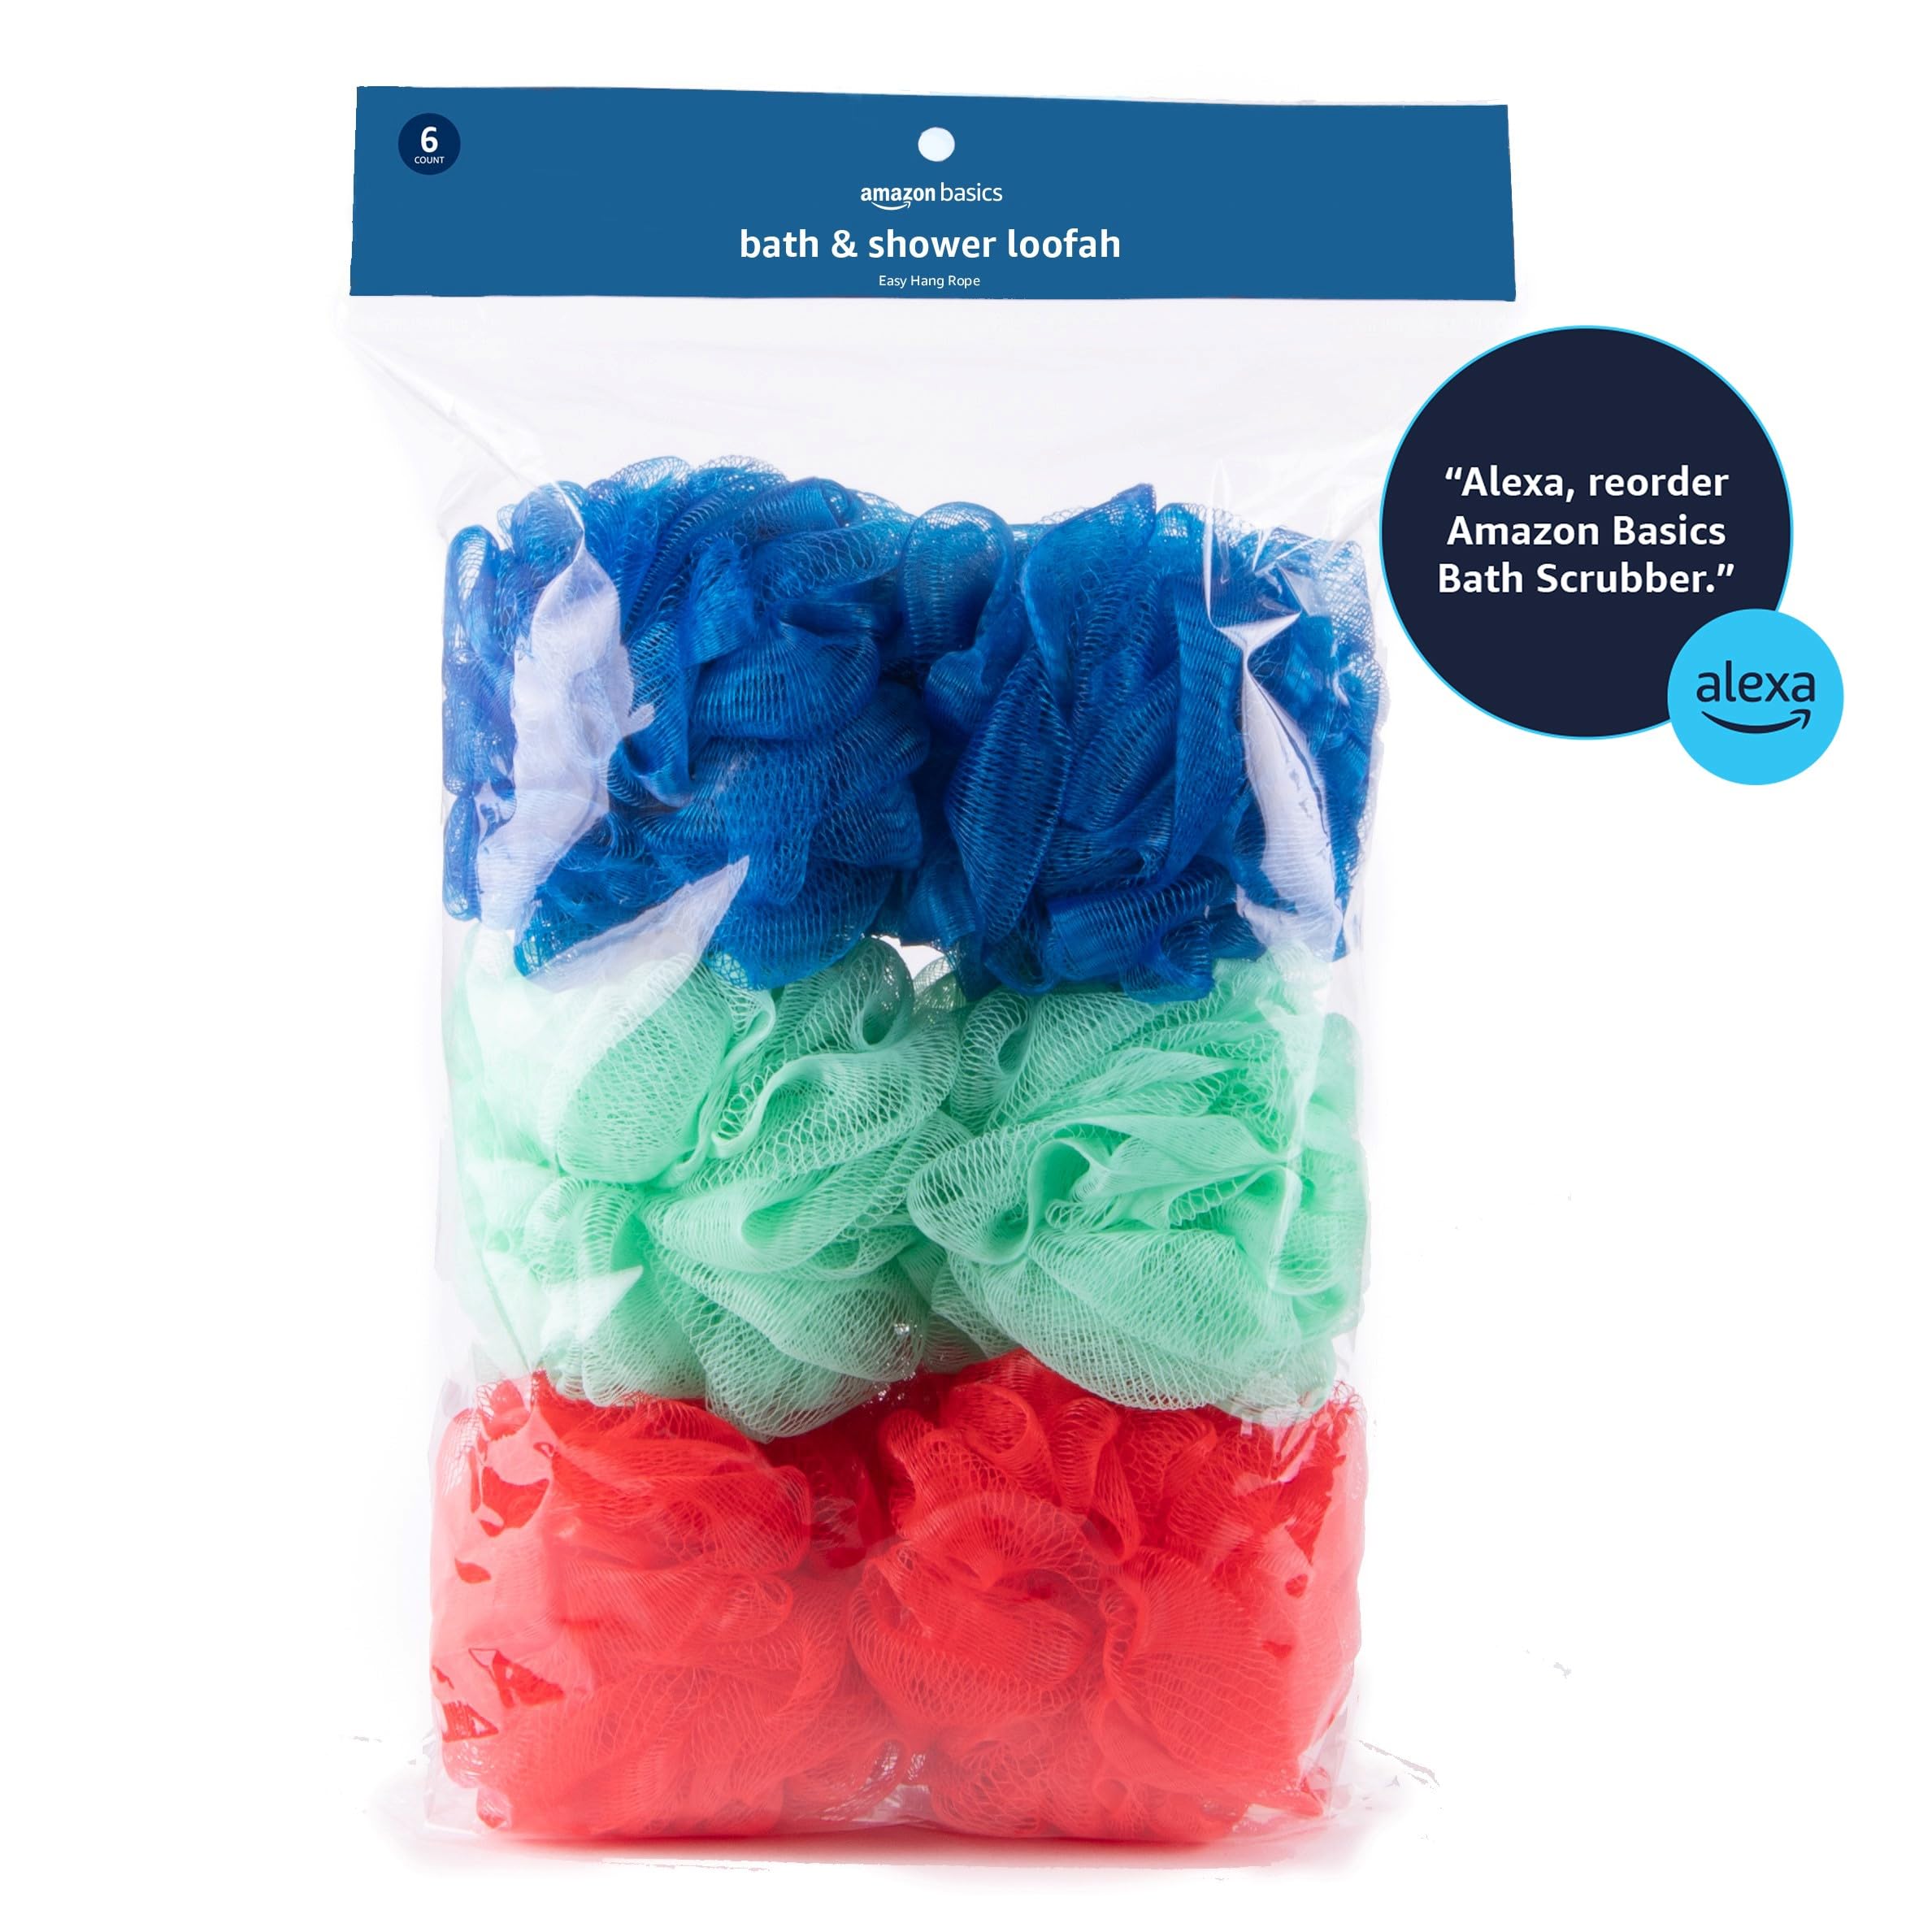 Amazon Basics Bath and Shower Loofah, Multicolor, 60 G, Pack of 6